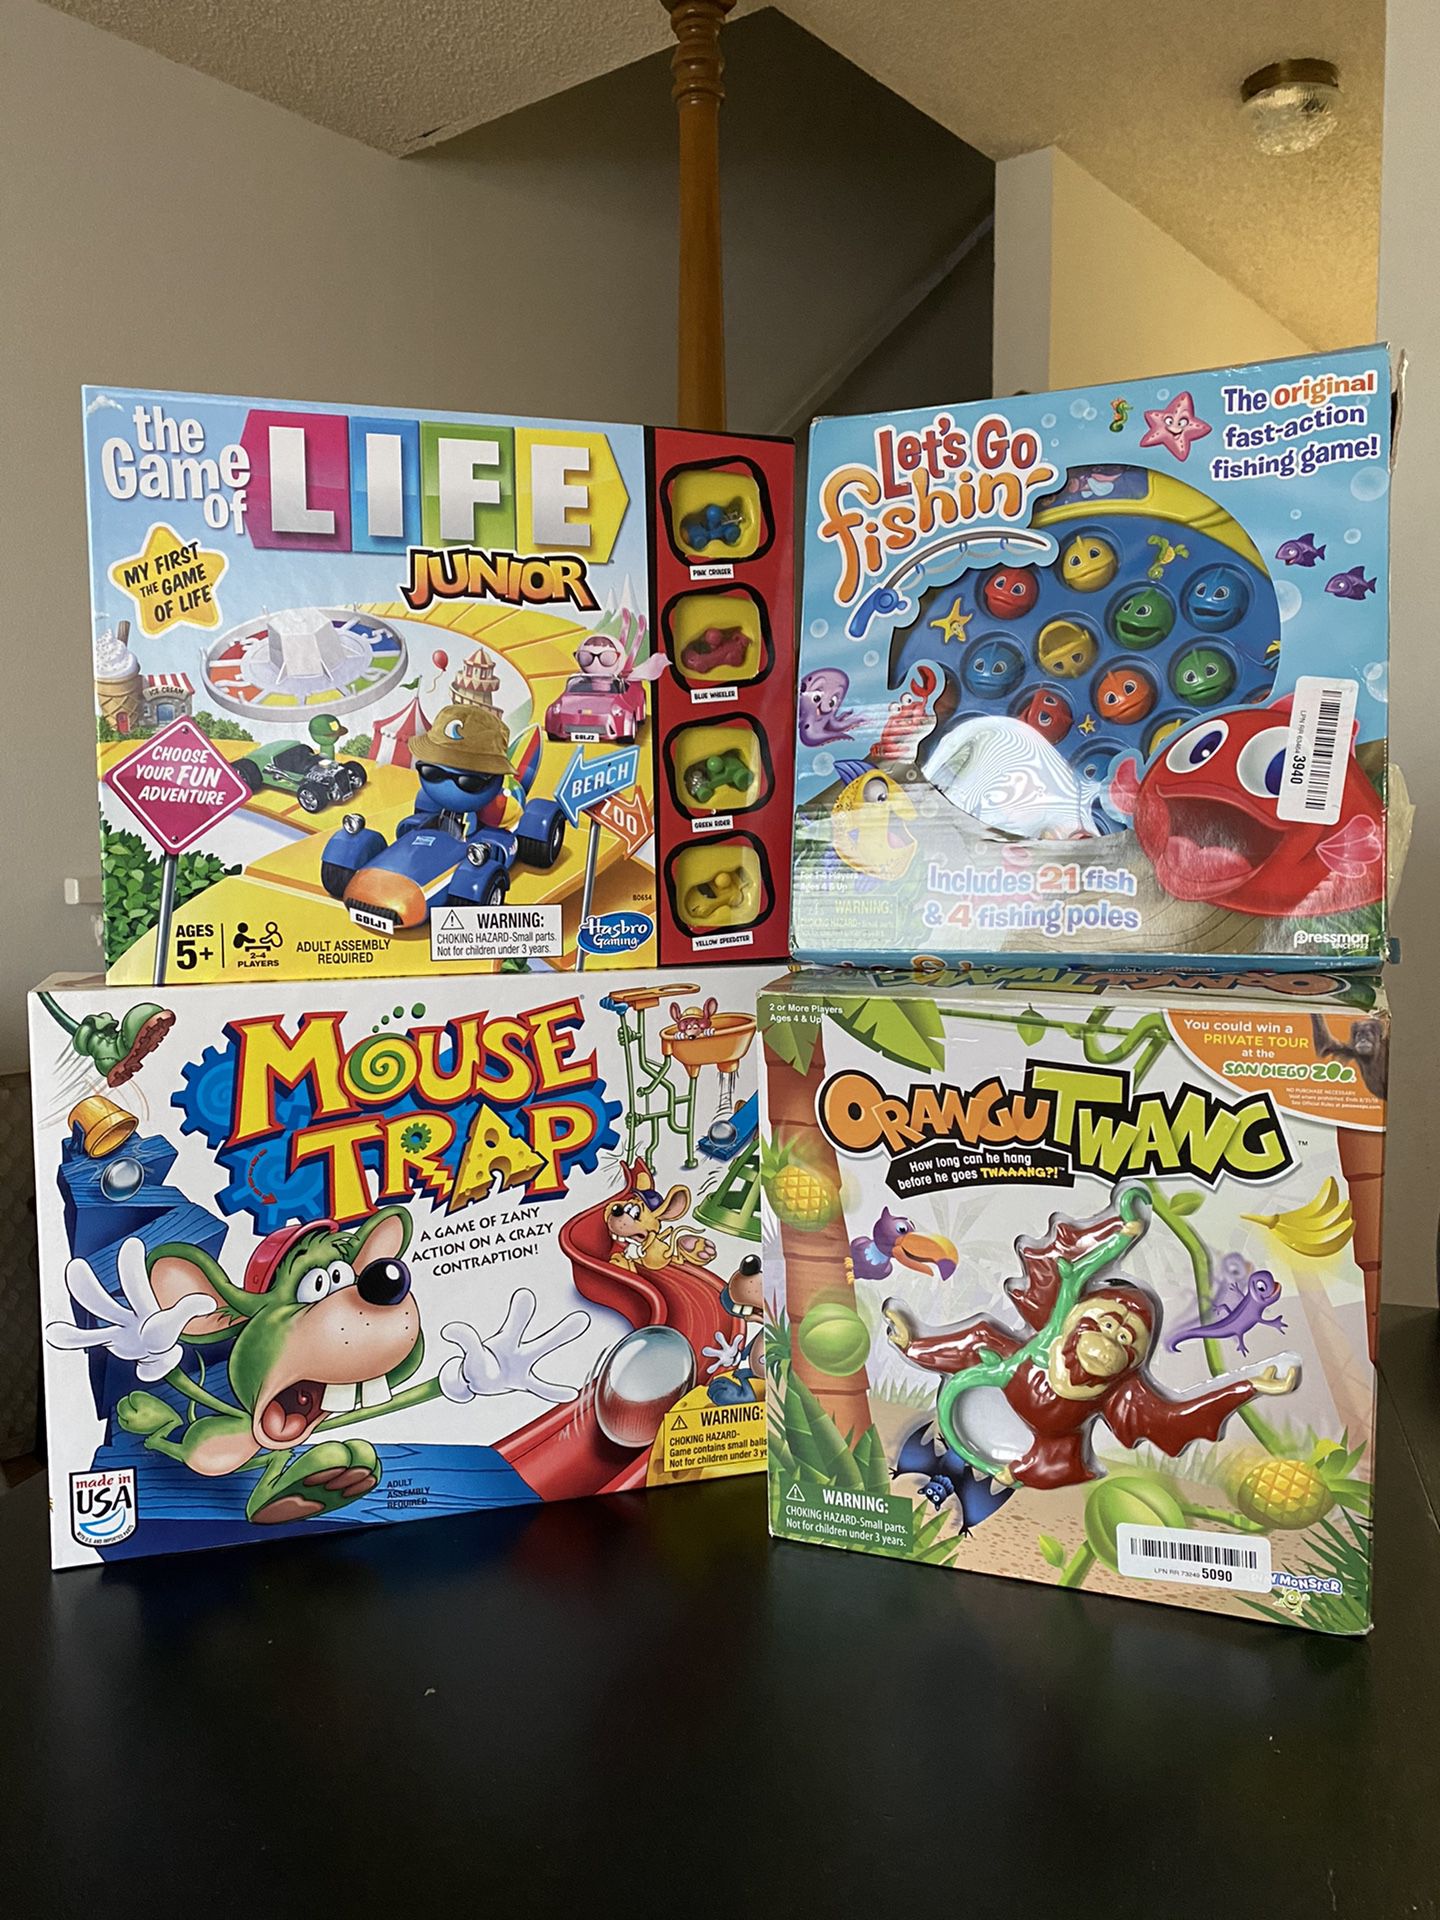 KIDS FAMILY GAME BUNDLE - MOUSE TRAP, THE GAME OF LIFE, LET’S GO FISHING, ORANGUTWANG